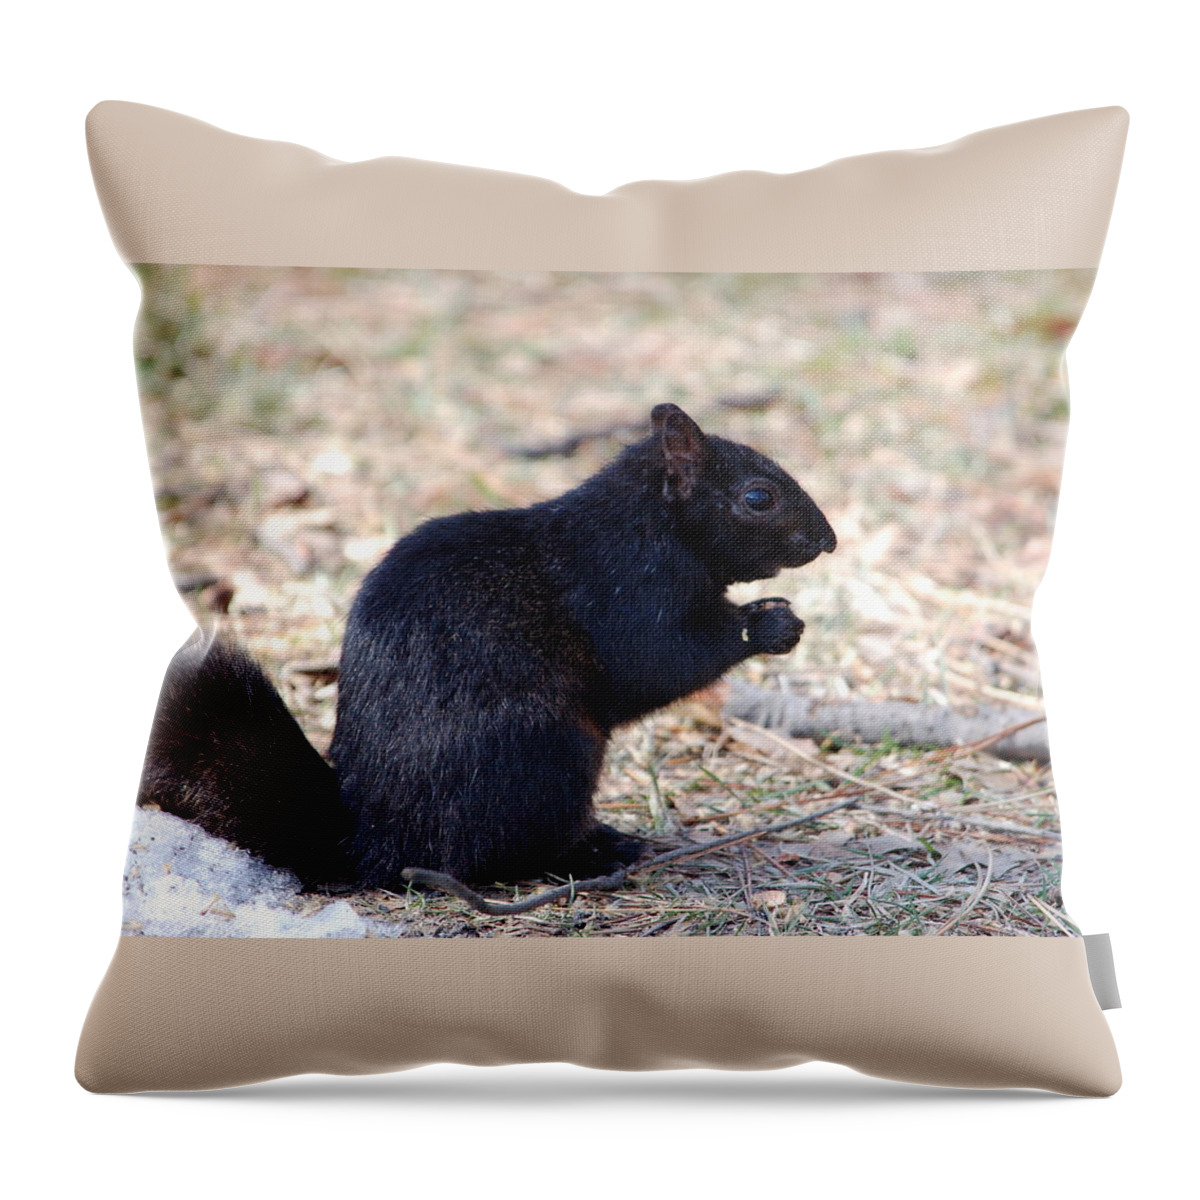 Squirrel Throw Pillow featuring the photograph Black Squirrel of Central Park by Sarah McKoy